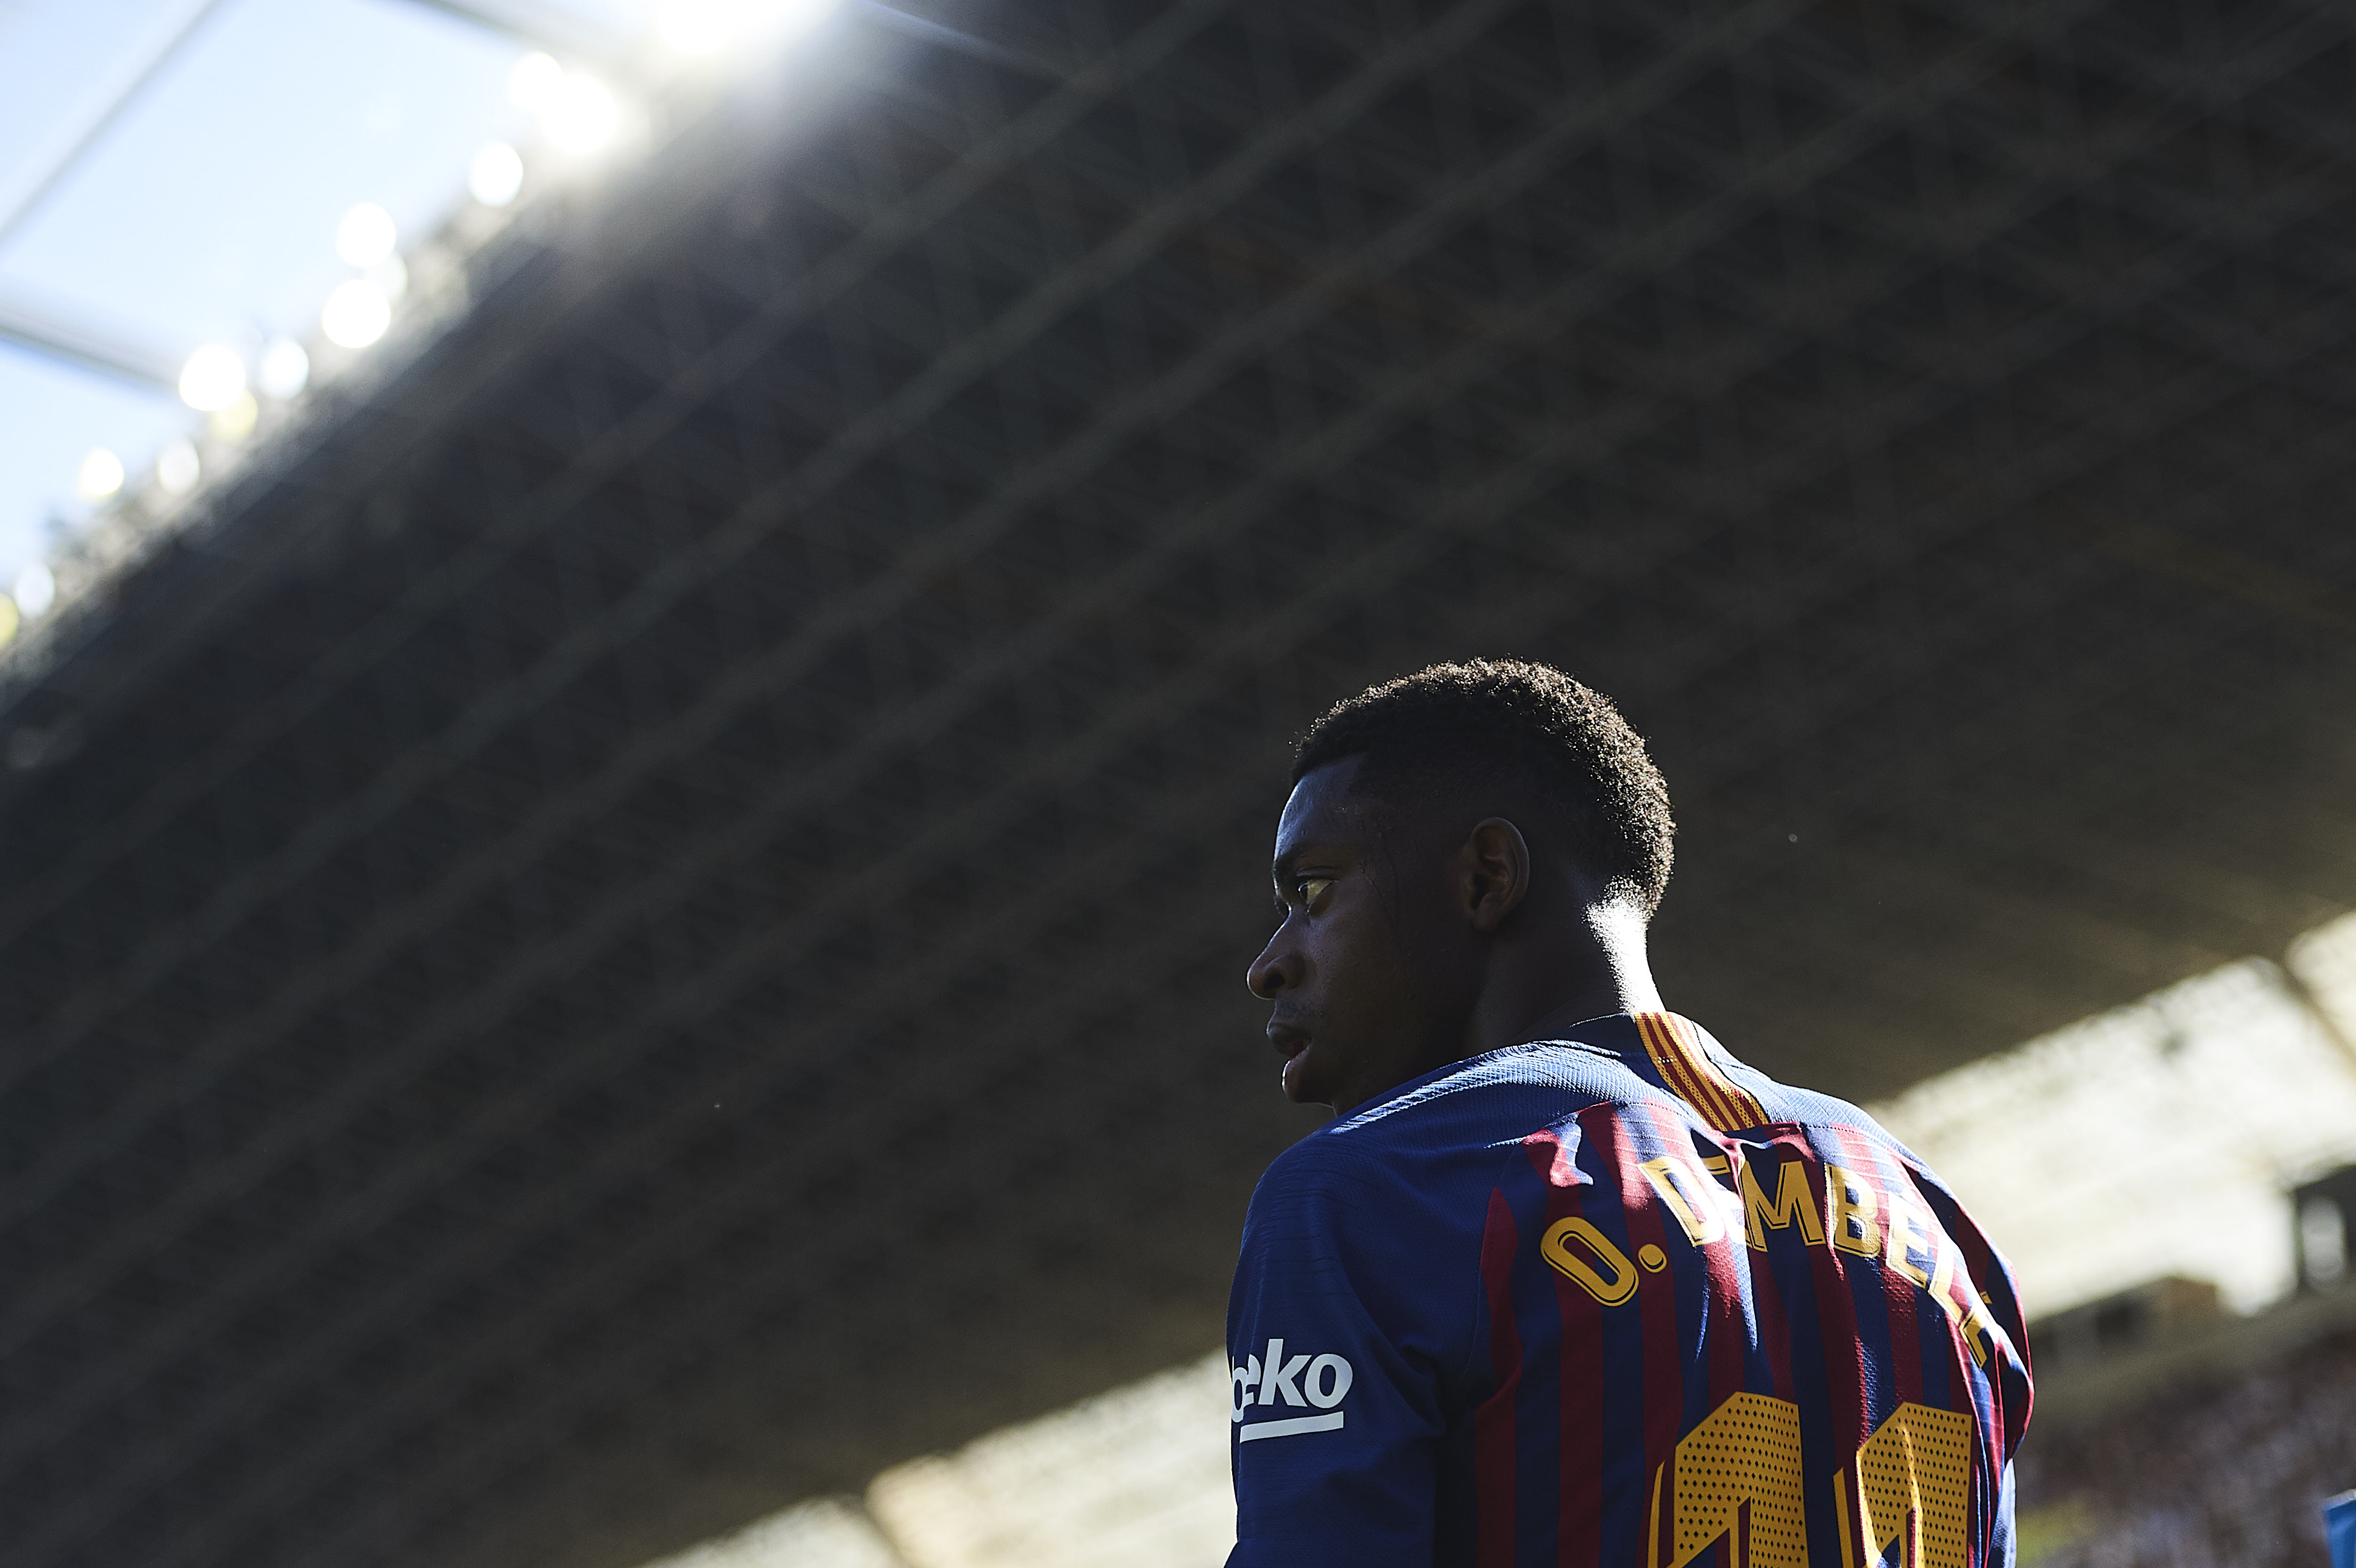 SAN SEBASTIAN, SPAIN - SEPTEMBER 15:  Ousmane Dembele of FC Barcelona  looks on during the La Liga match between Real Sociedad and FC Barcelona at Estadio Anoeta on September 15, 2018 in San Sebastian, Spain.  (Photo by Aitor Alcalde/Getty Images)